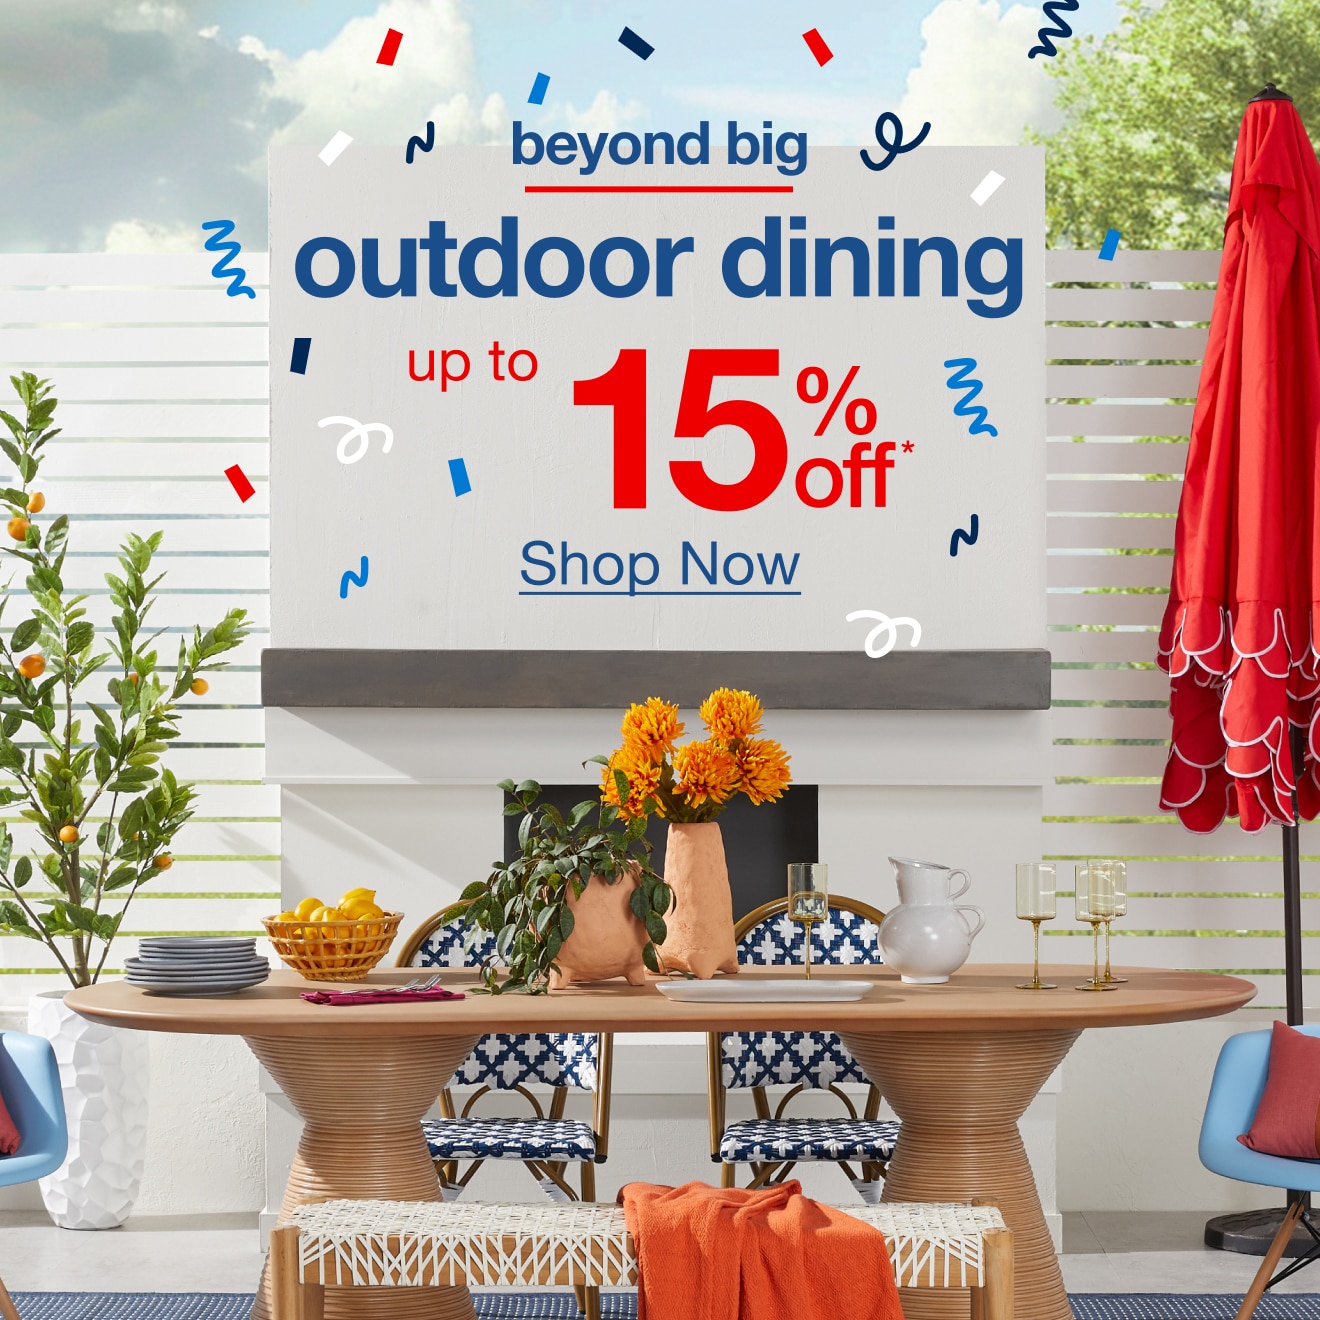 Up to 15% off Outdoor Dining - Shop Now!